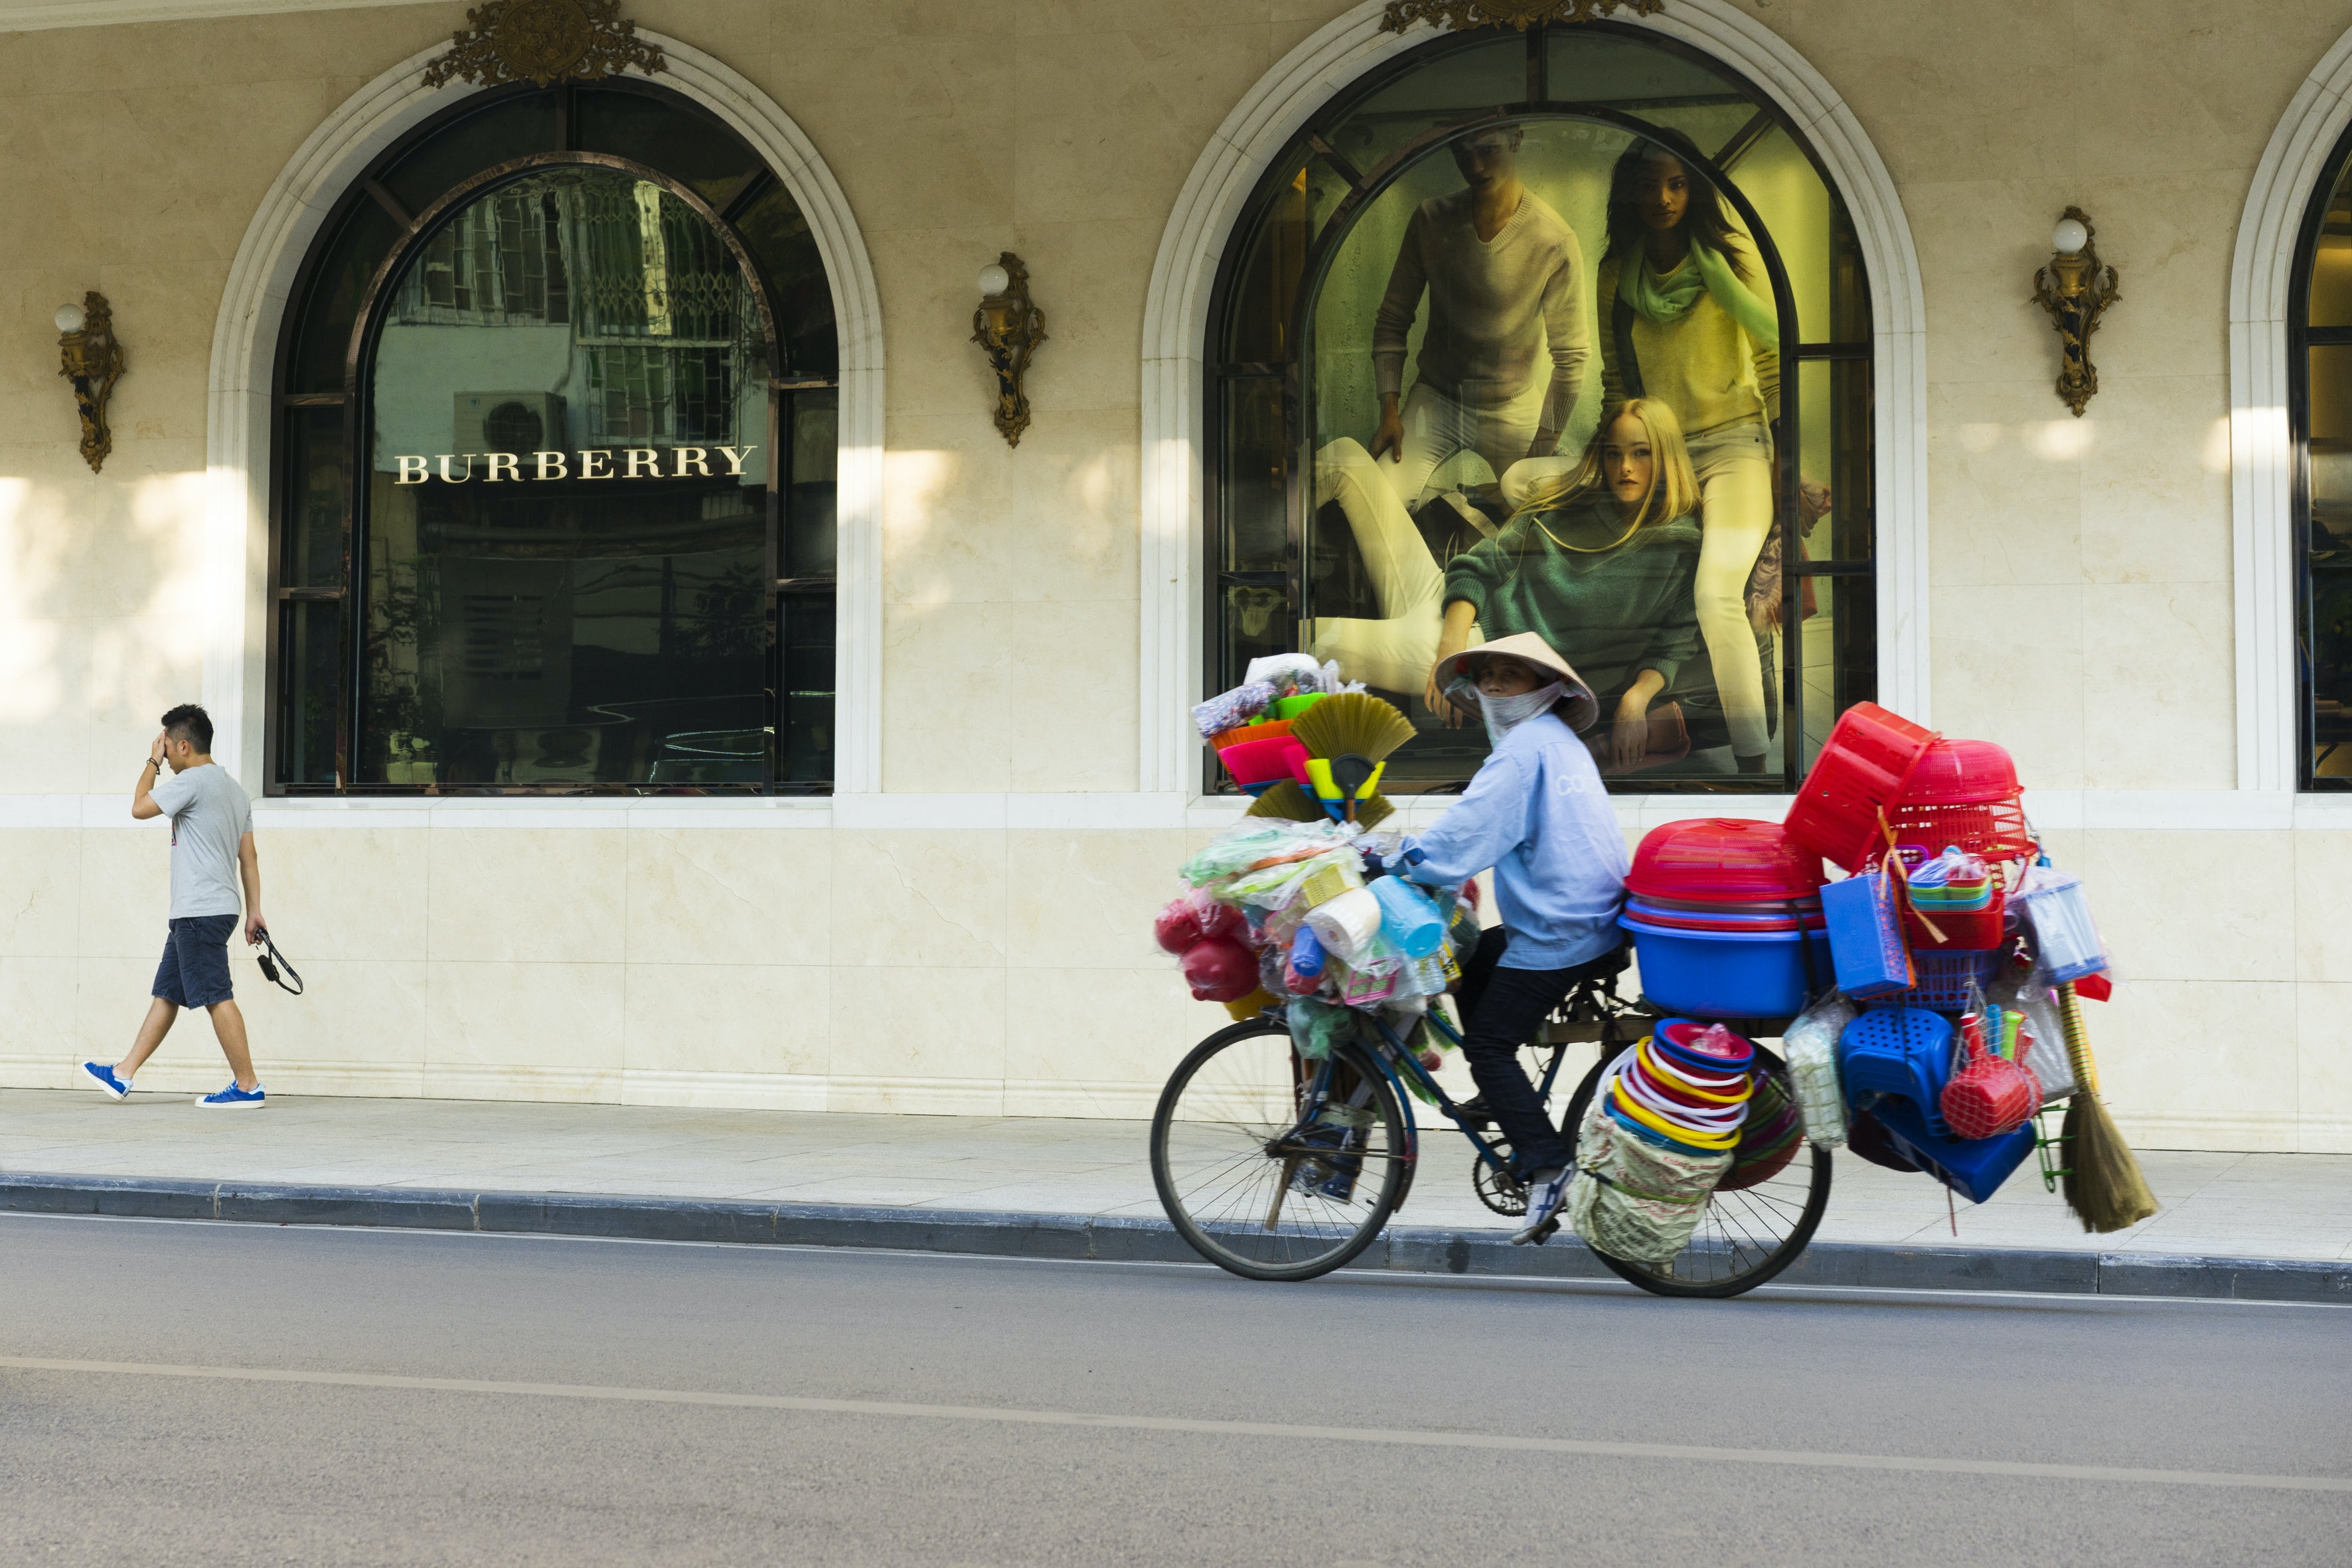 Vietnam - A Haven of Luxury Clothing Brands for Foreign Investors